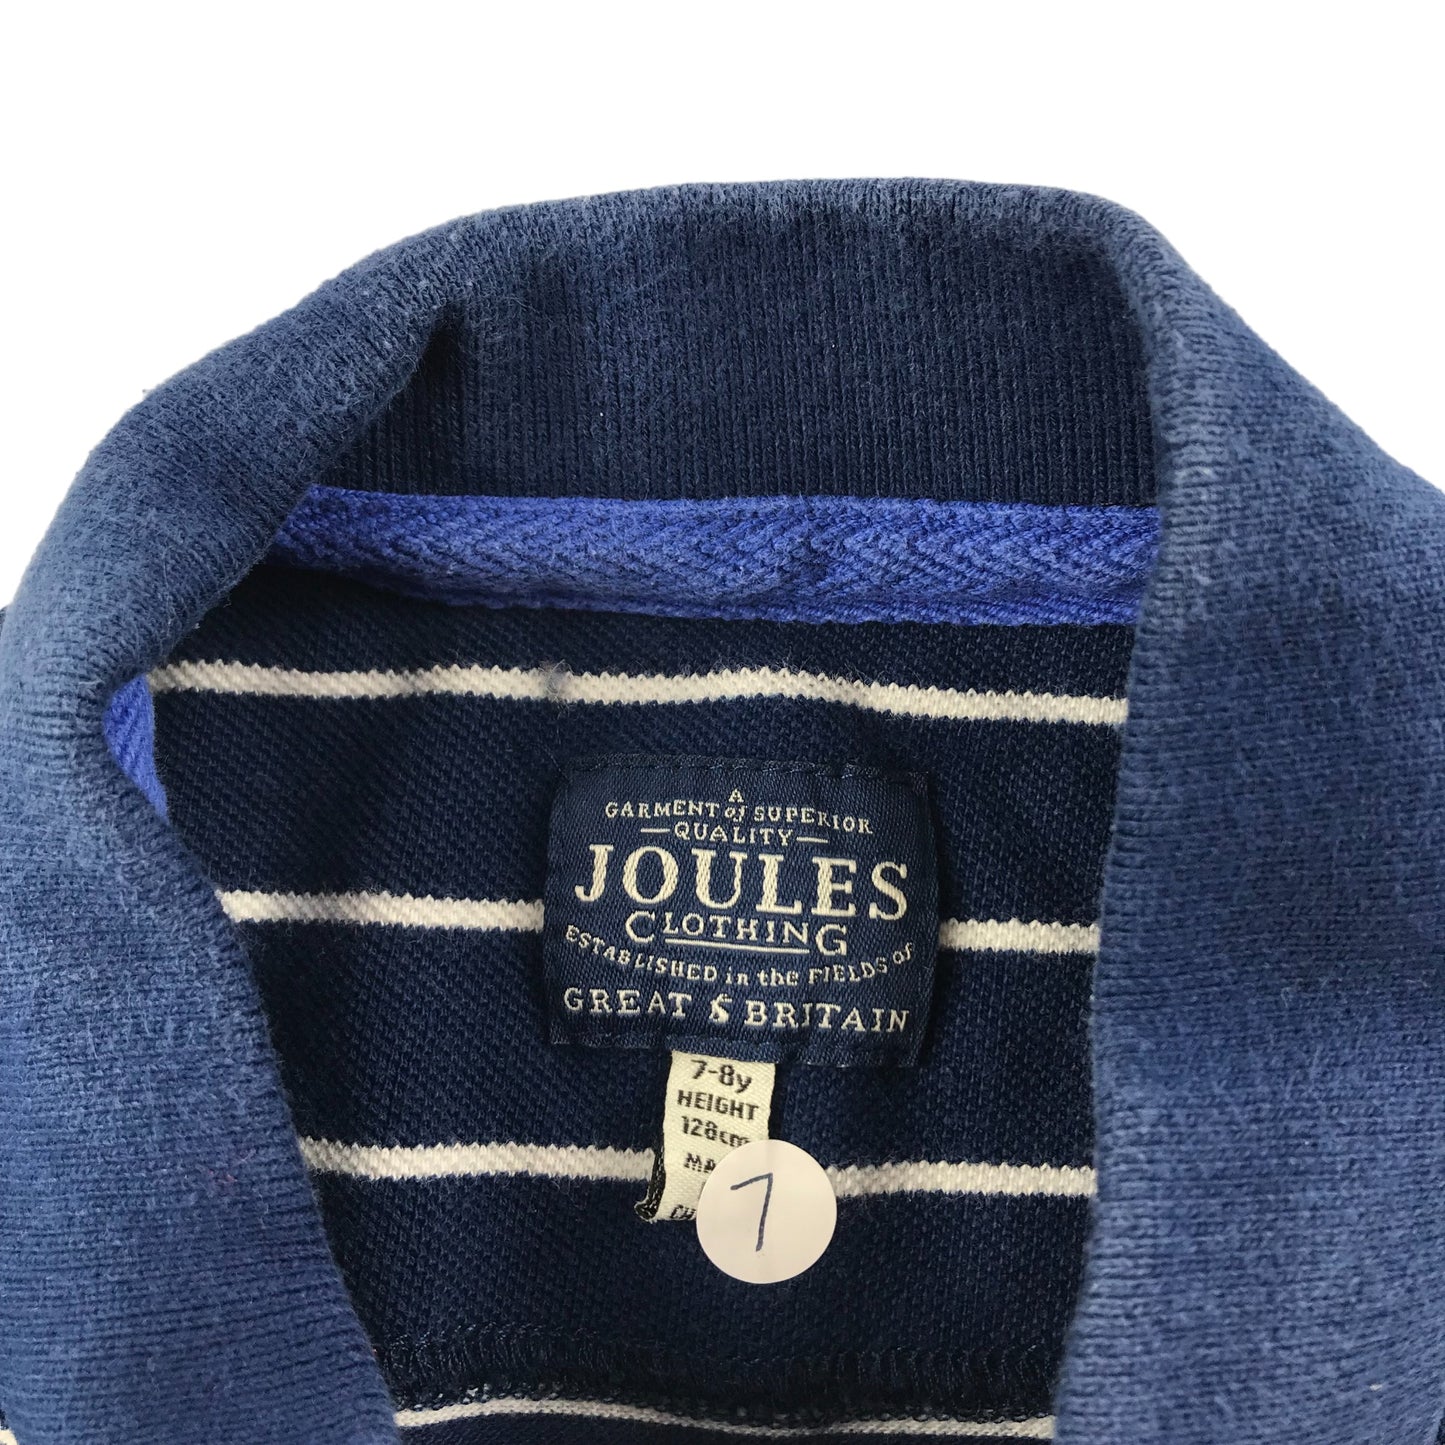 Joules Polo Age 7 Shirt Navy Short Sleeve white stripes